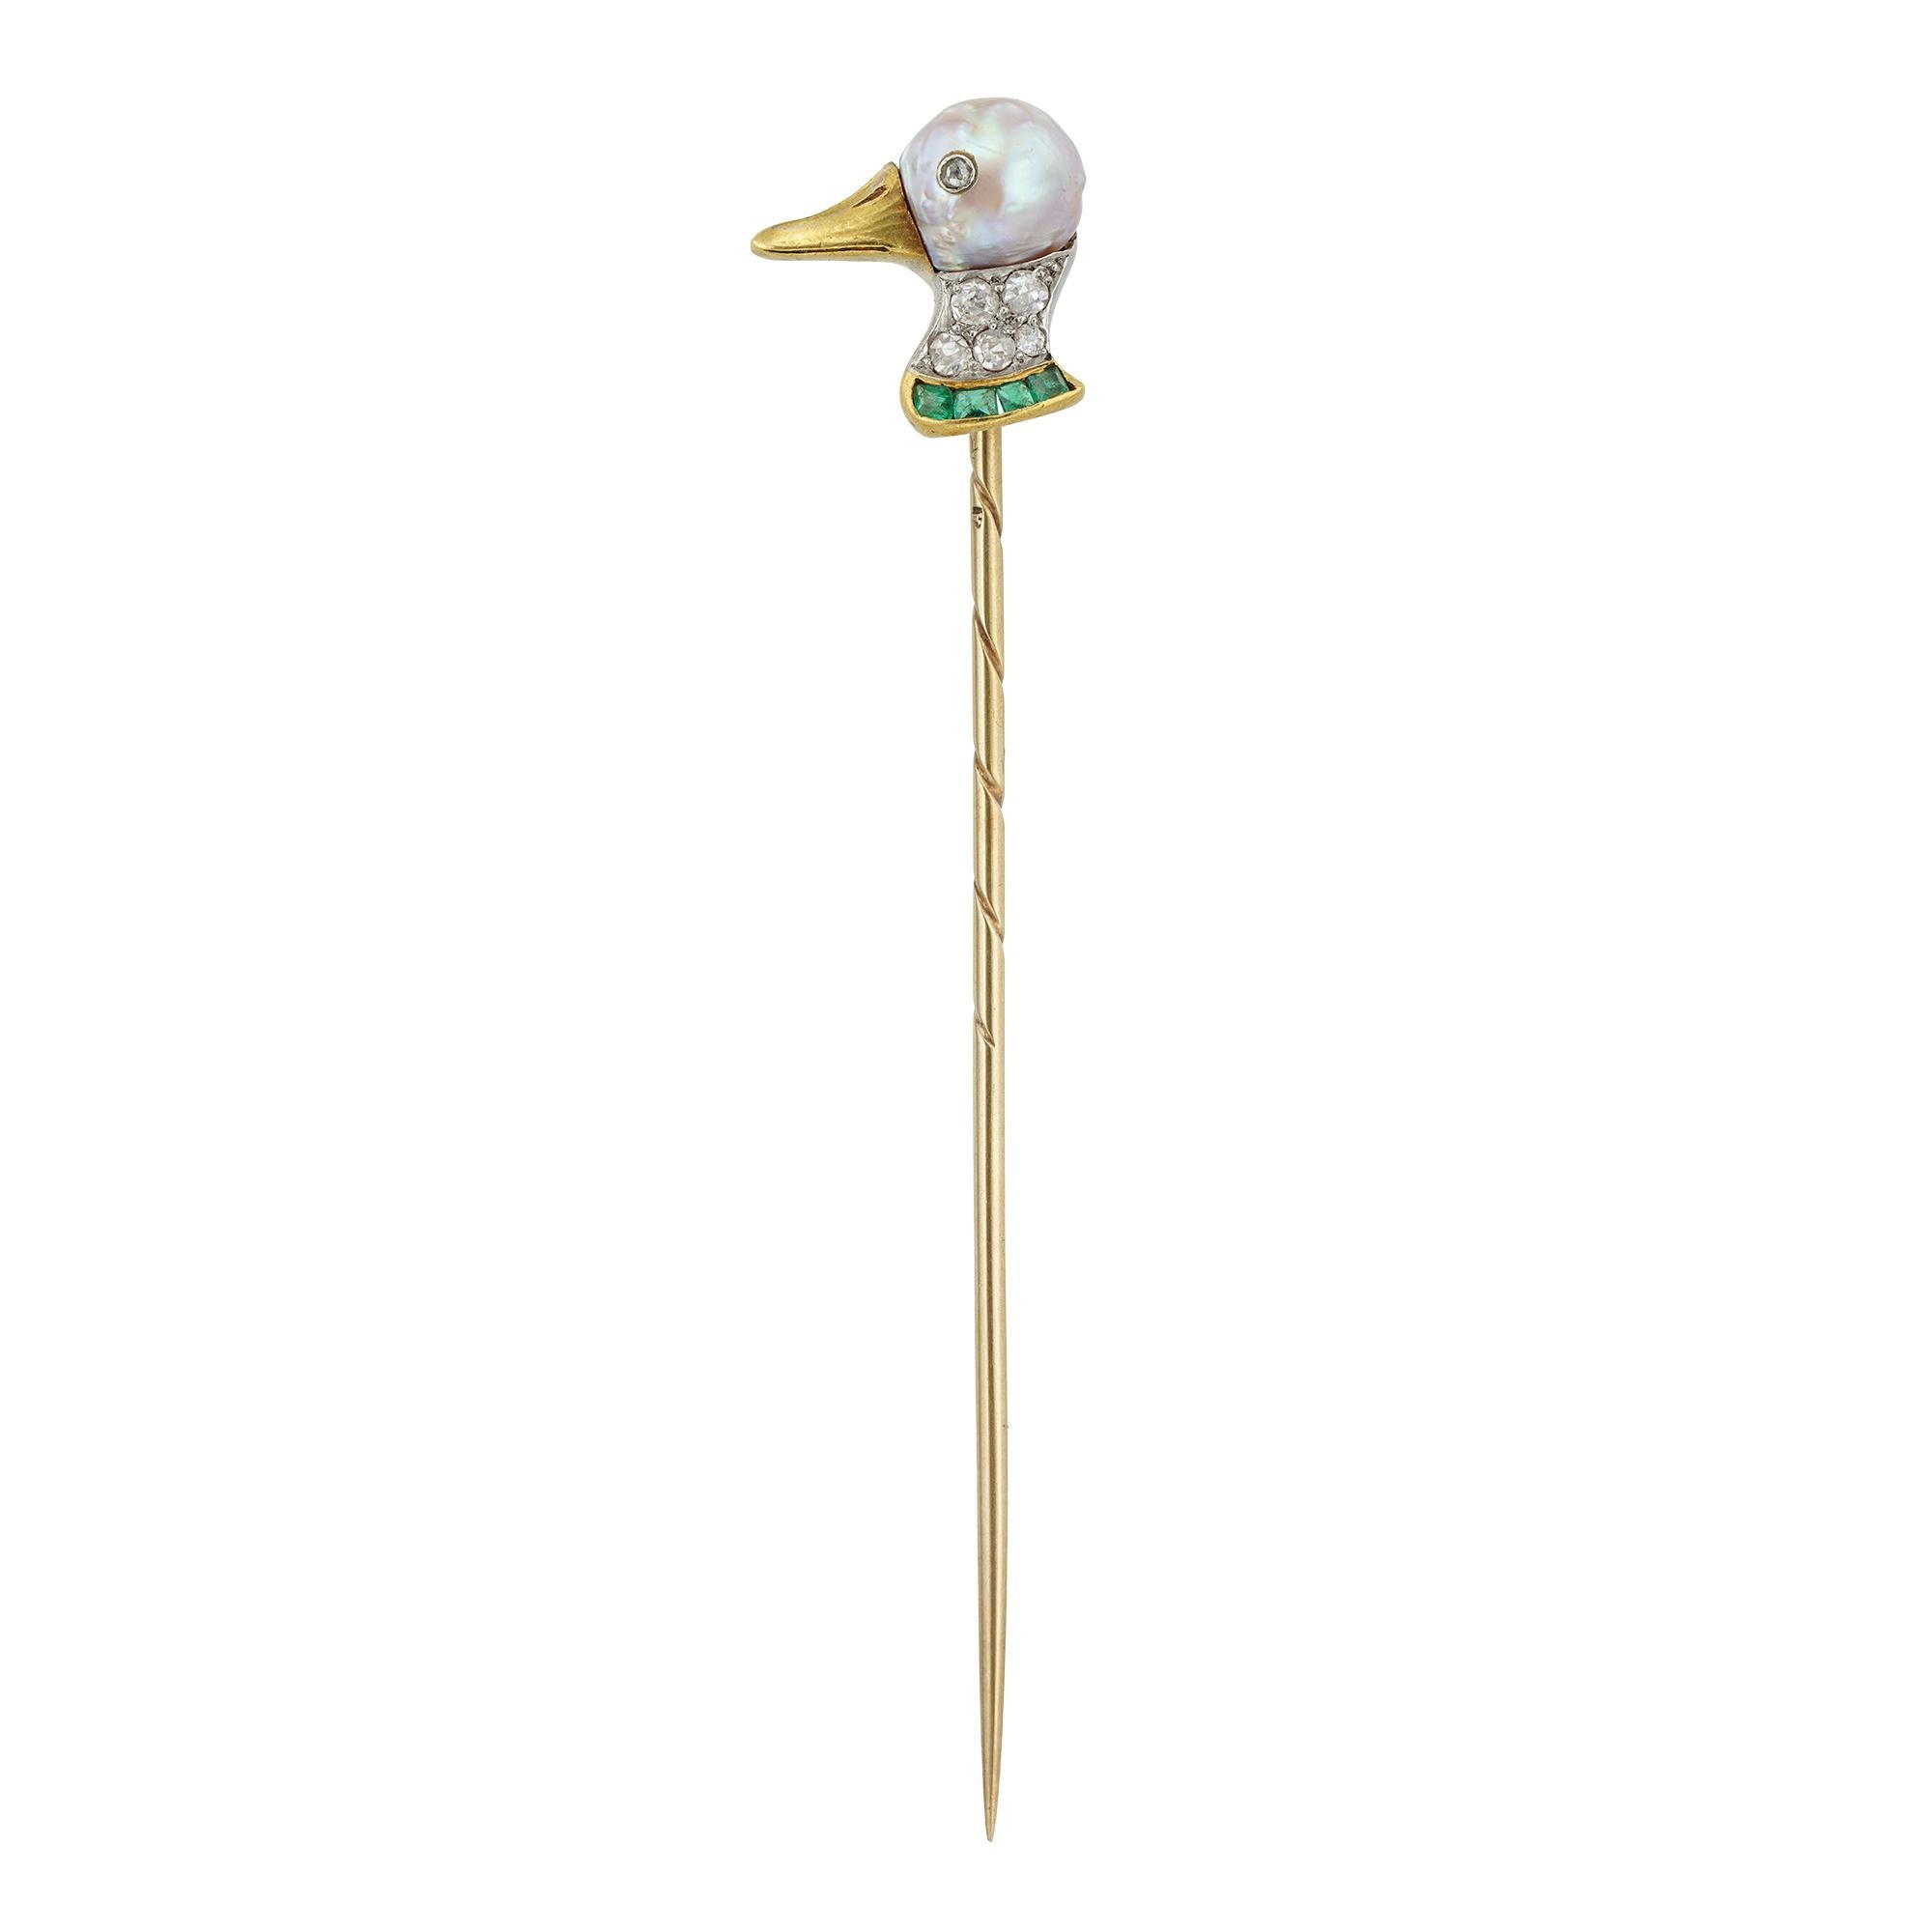 An Early 20th century pearl, diamond and emerald duck head stick-pin, the head of the duck formed of a baroque pearl, with a diamond inlayed eye, the beak made of yellow gold, the collar set with five old-cut diamonds and four calibre-cut emeralds,